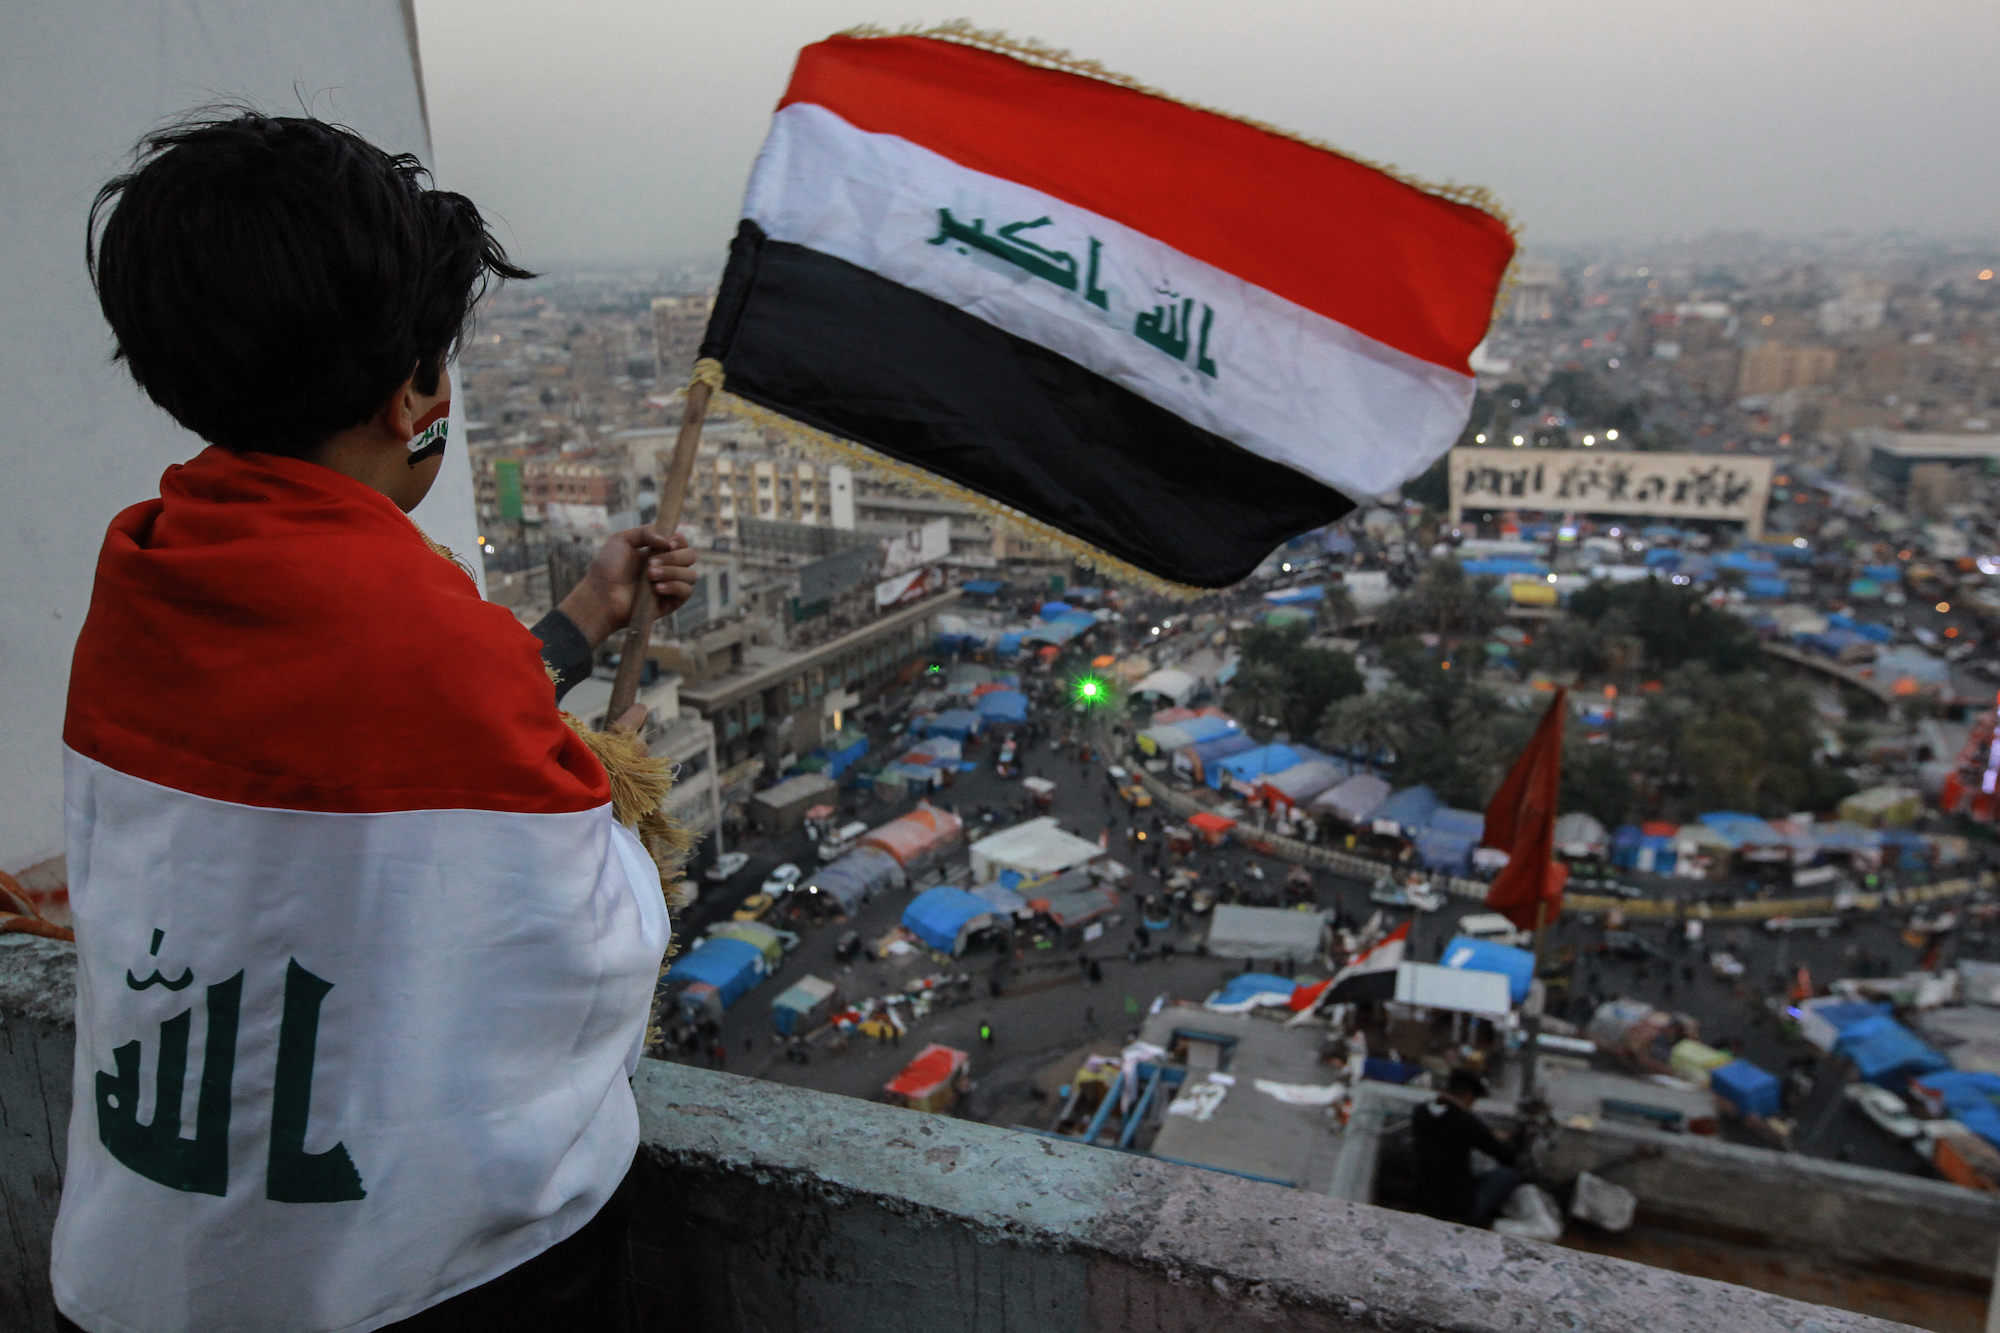 The New Iraqi Flag: An exercise in identity manipulation